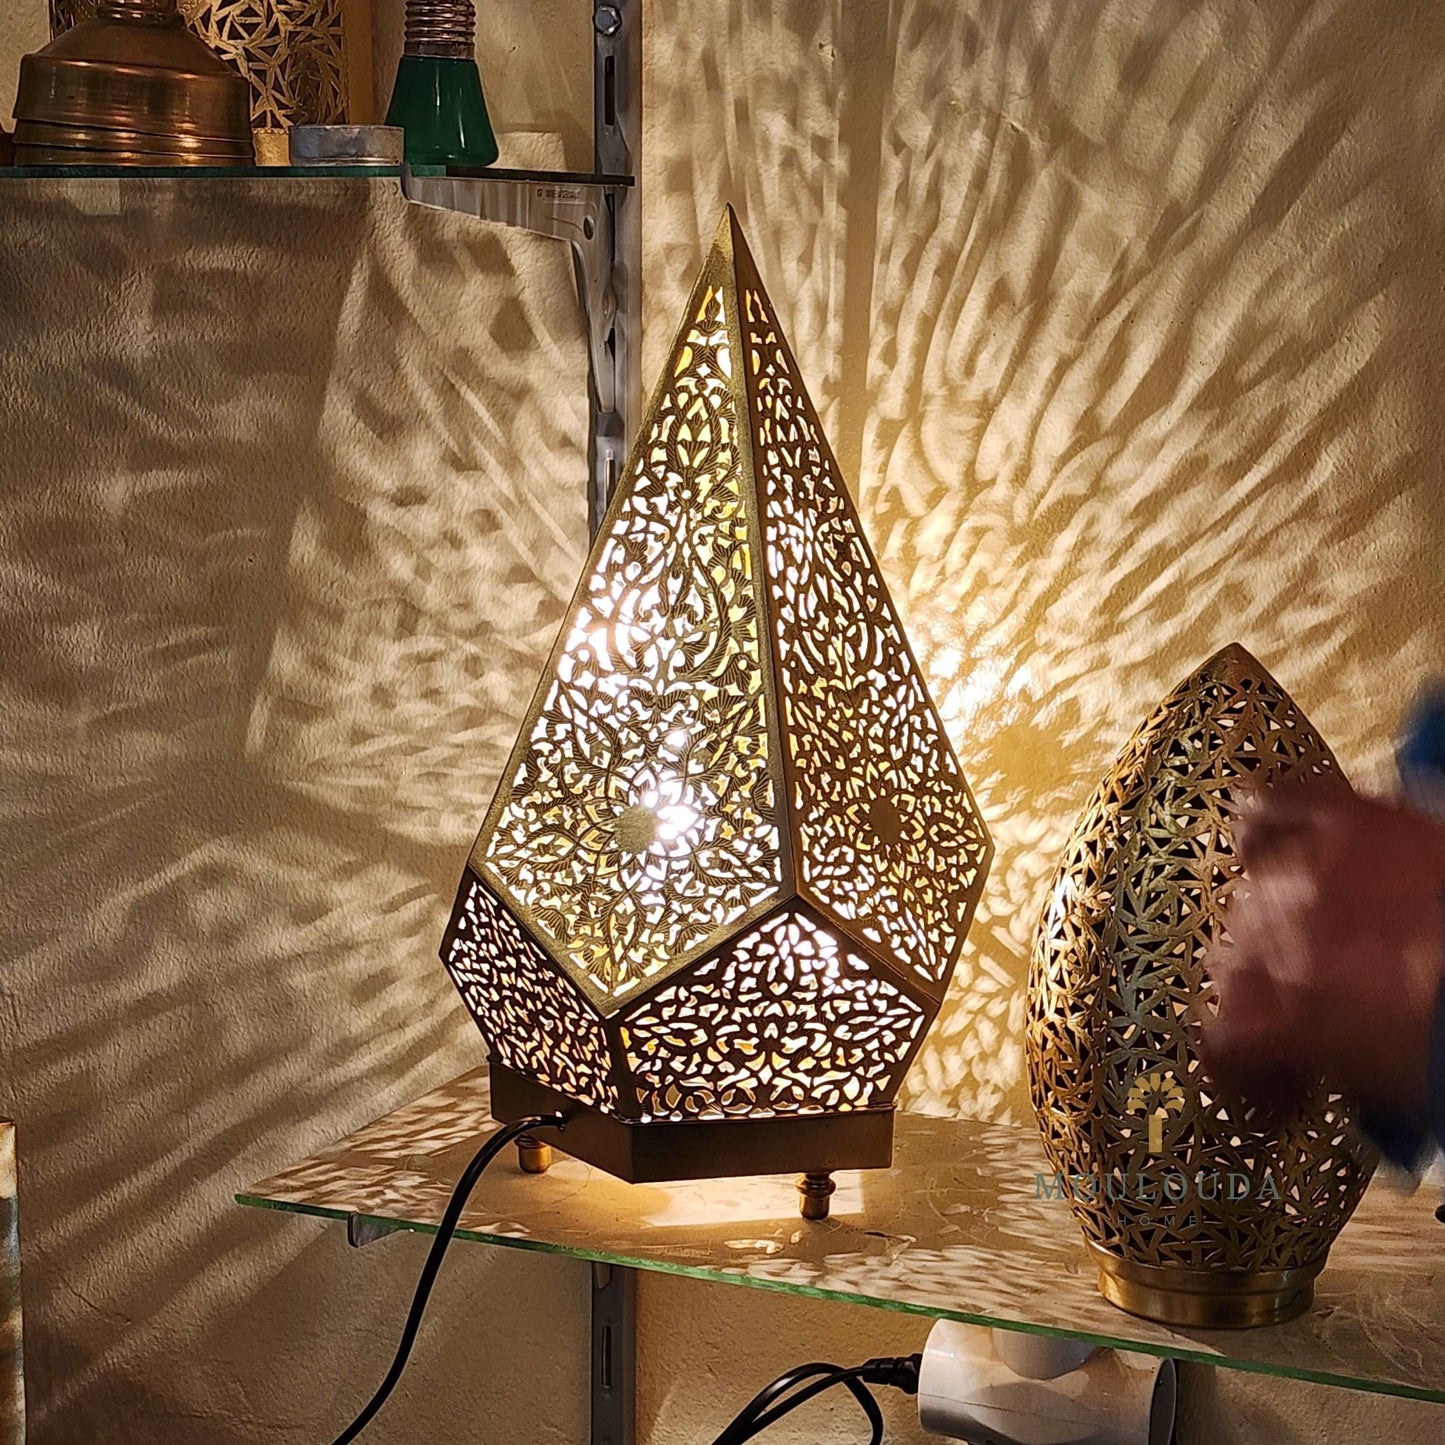 Handmade Moroccan Lamp - Luxury Standing/Table Lamp for Beautiful Moroccan Lighting - Mouloudahome